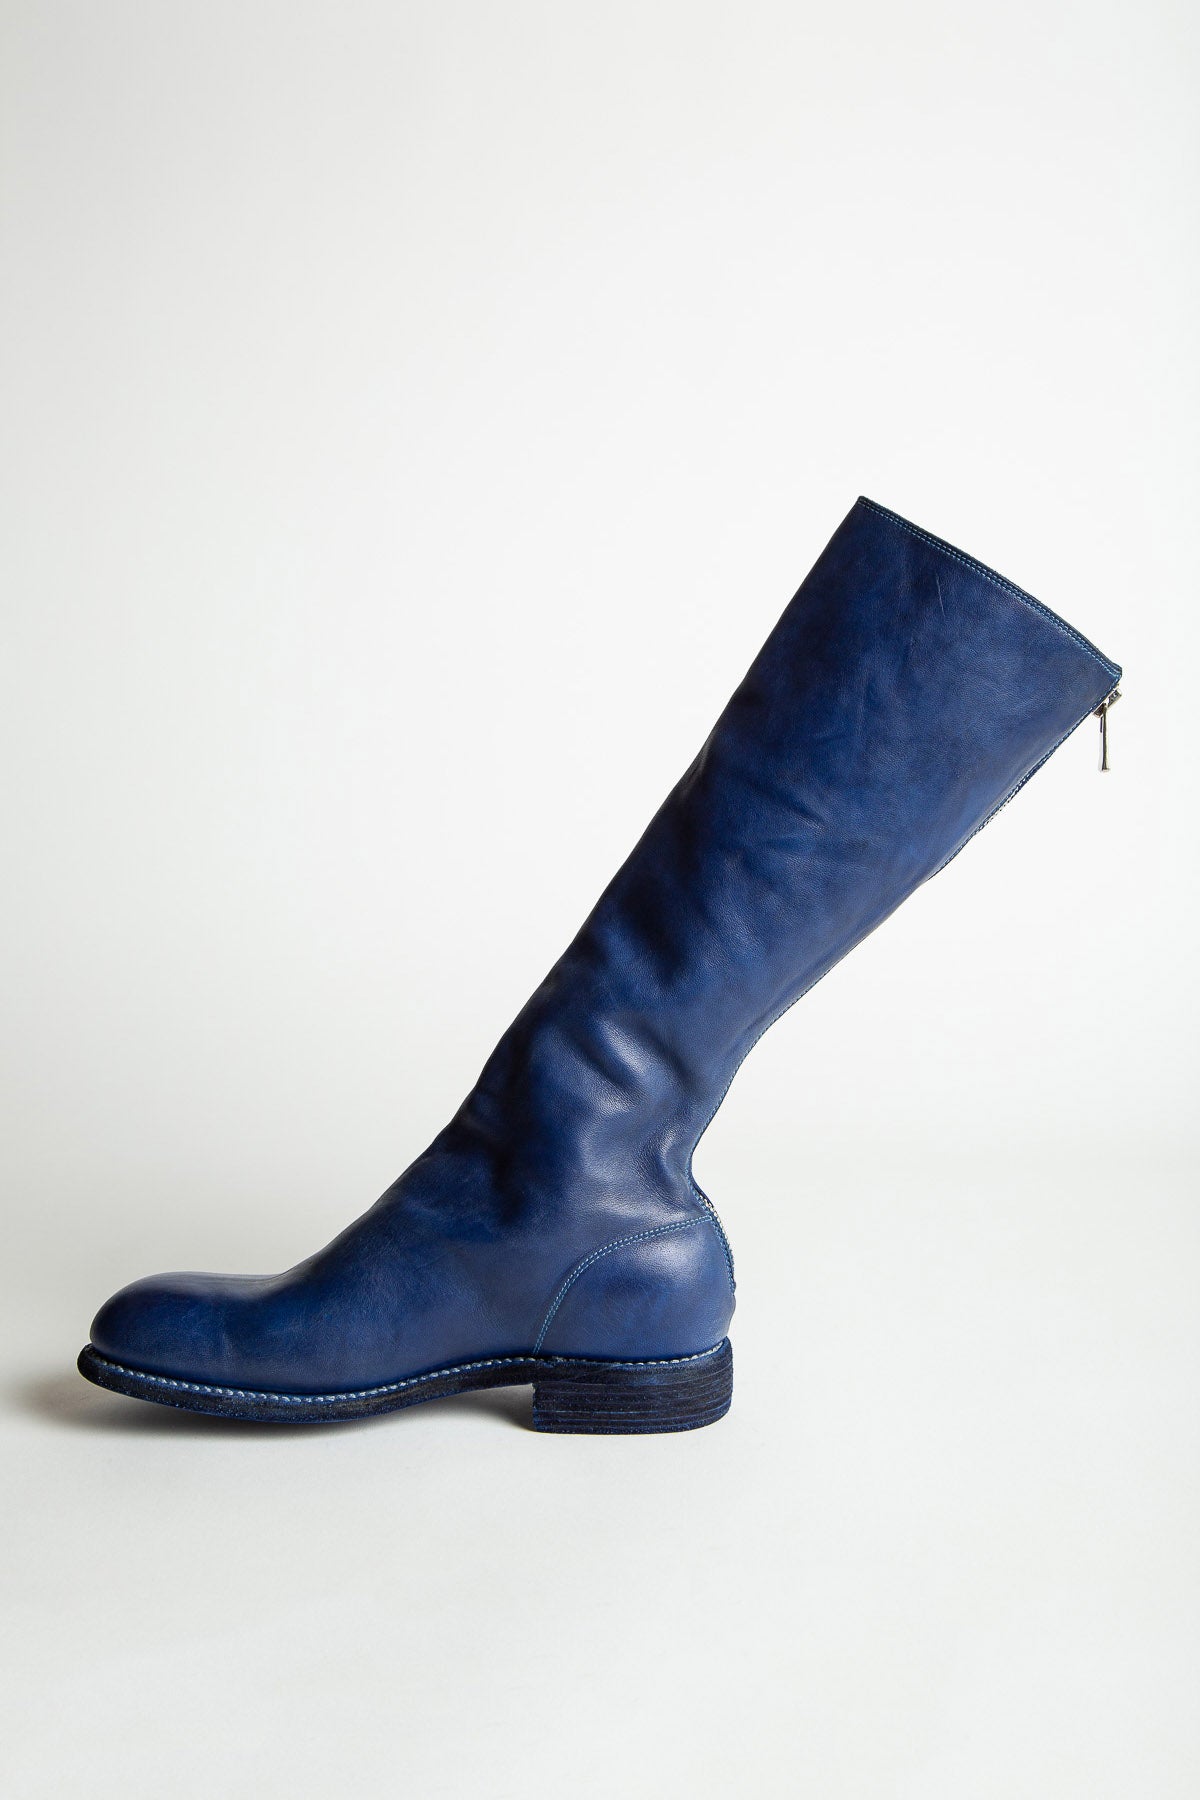 GUIDI | LEATHER BACK ZIP MID-CALF BOOTS